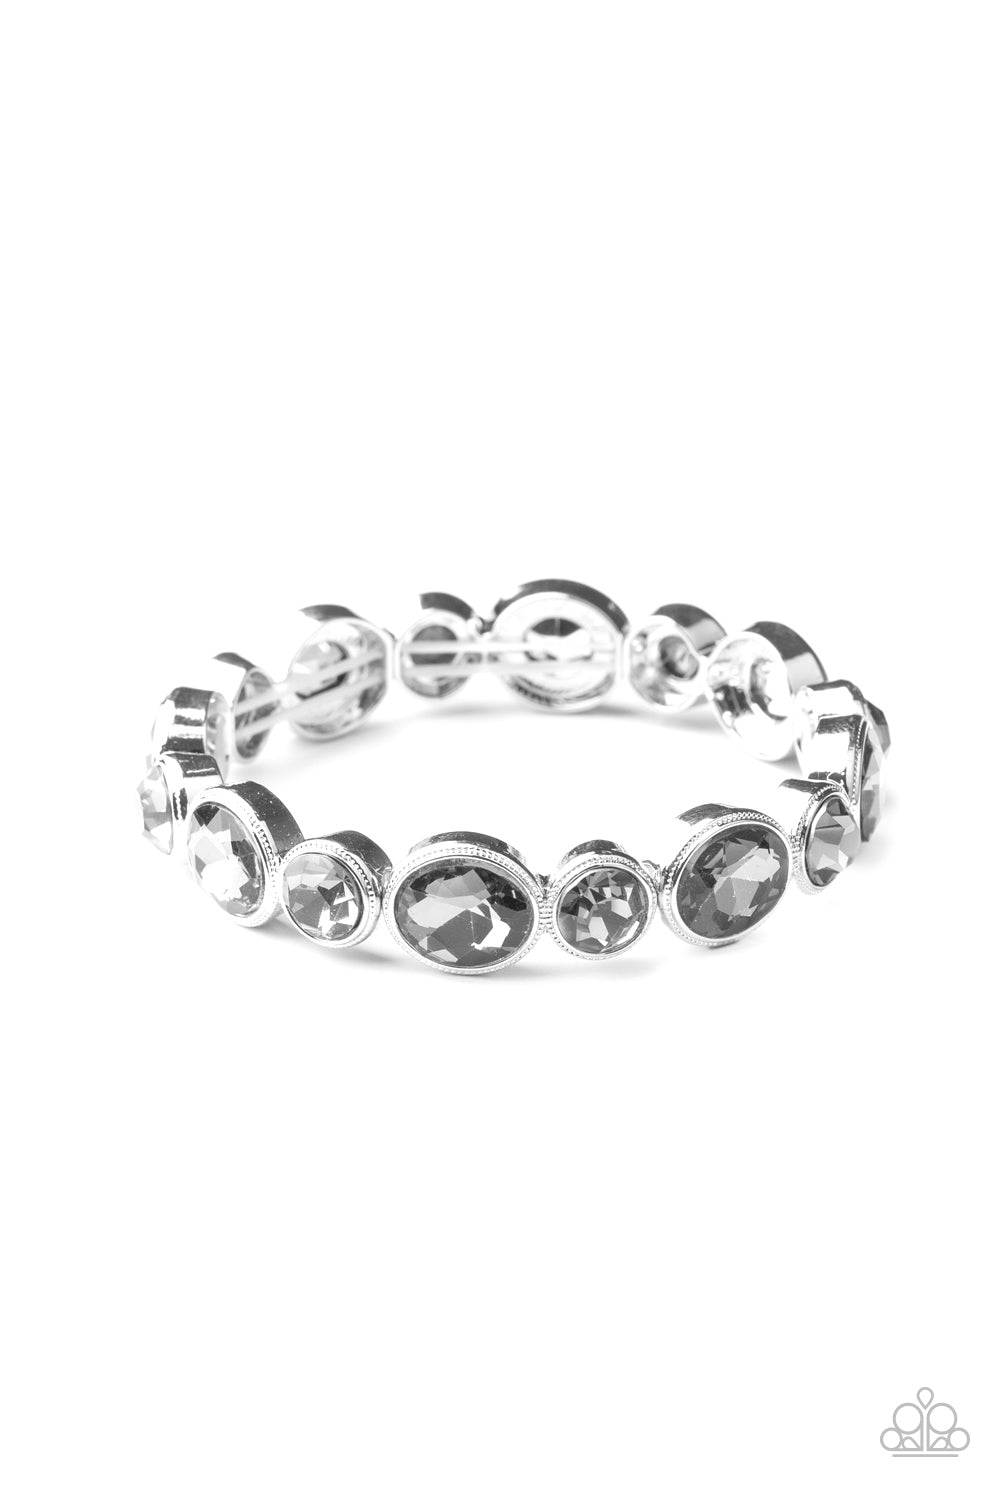 Still GLOWING Strong - Silver - Bracelets - Paparazzi Accessories